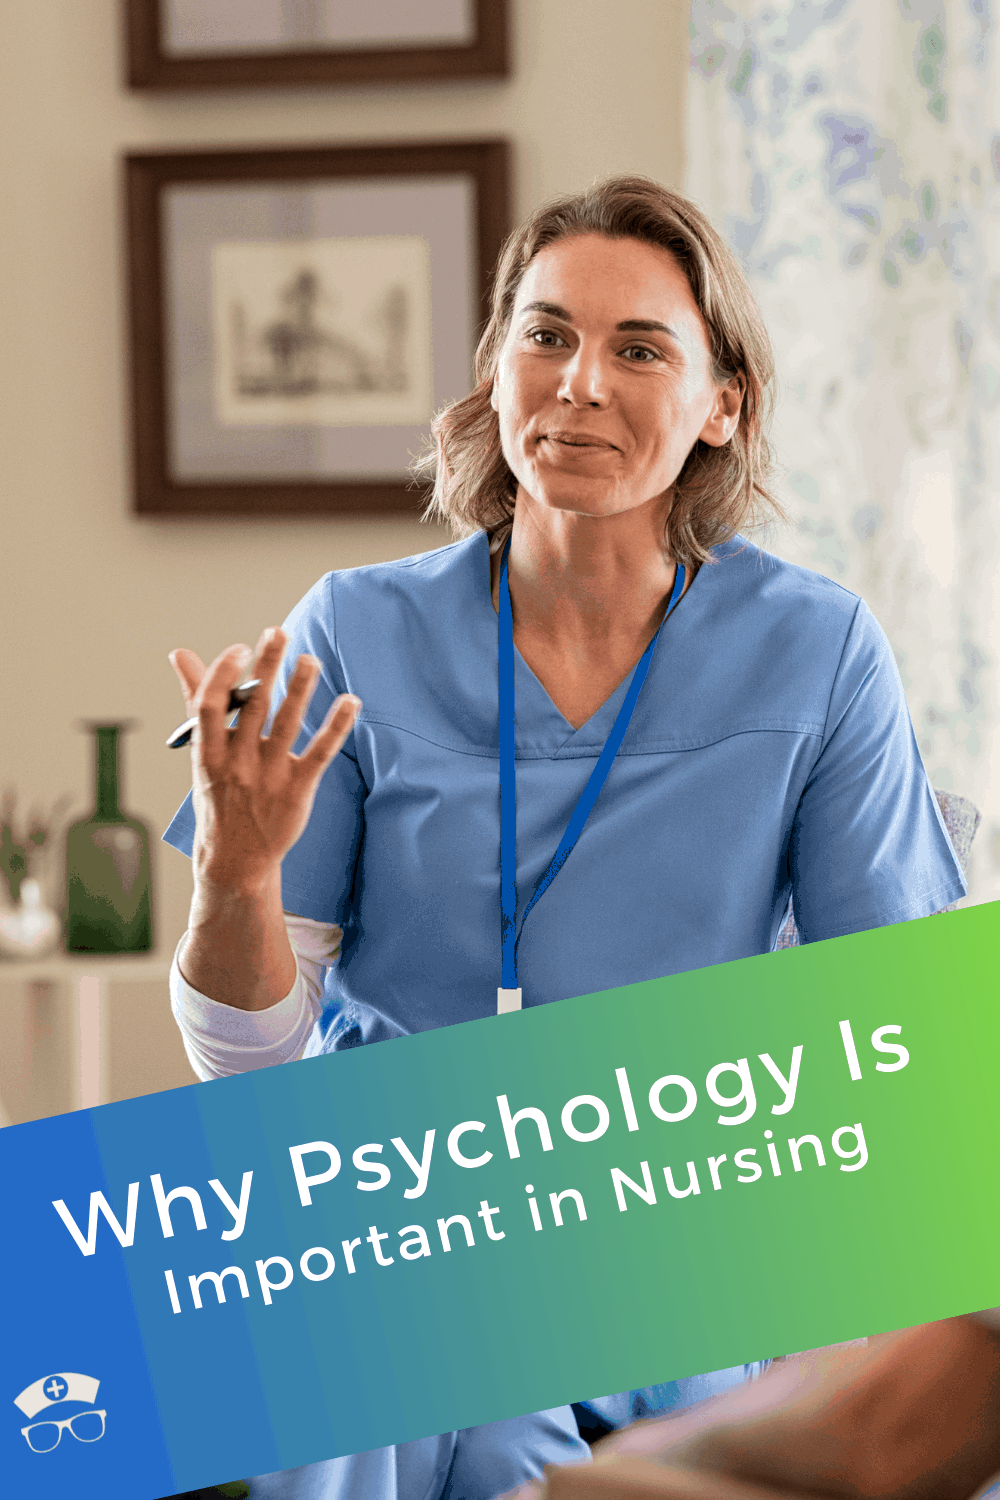 assignment on application of psychology in nursing